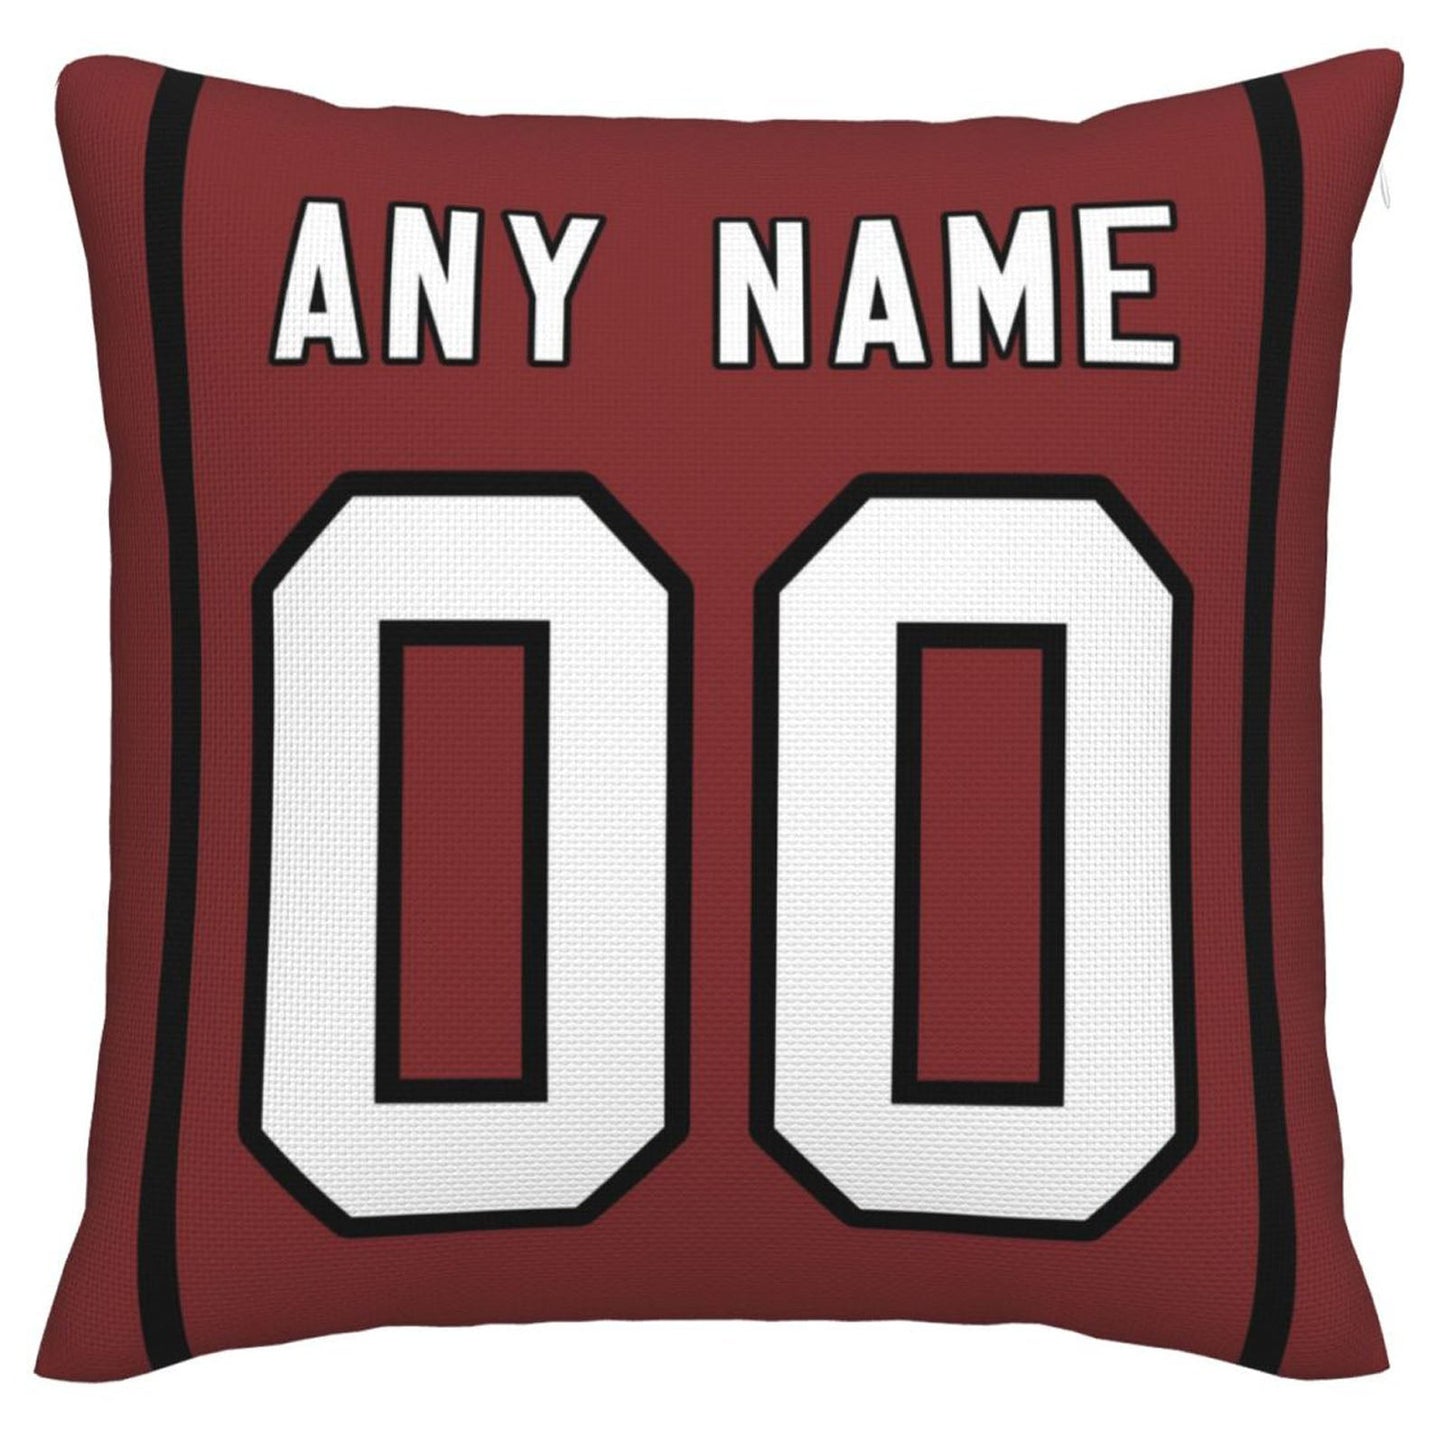 Custom A.Cardinals Pillow Decorative Throw Pillow Case - Print Personalized Football Team Fans Name & Number Birthday Gift Football Pillows